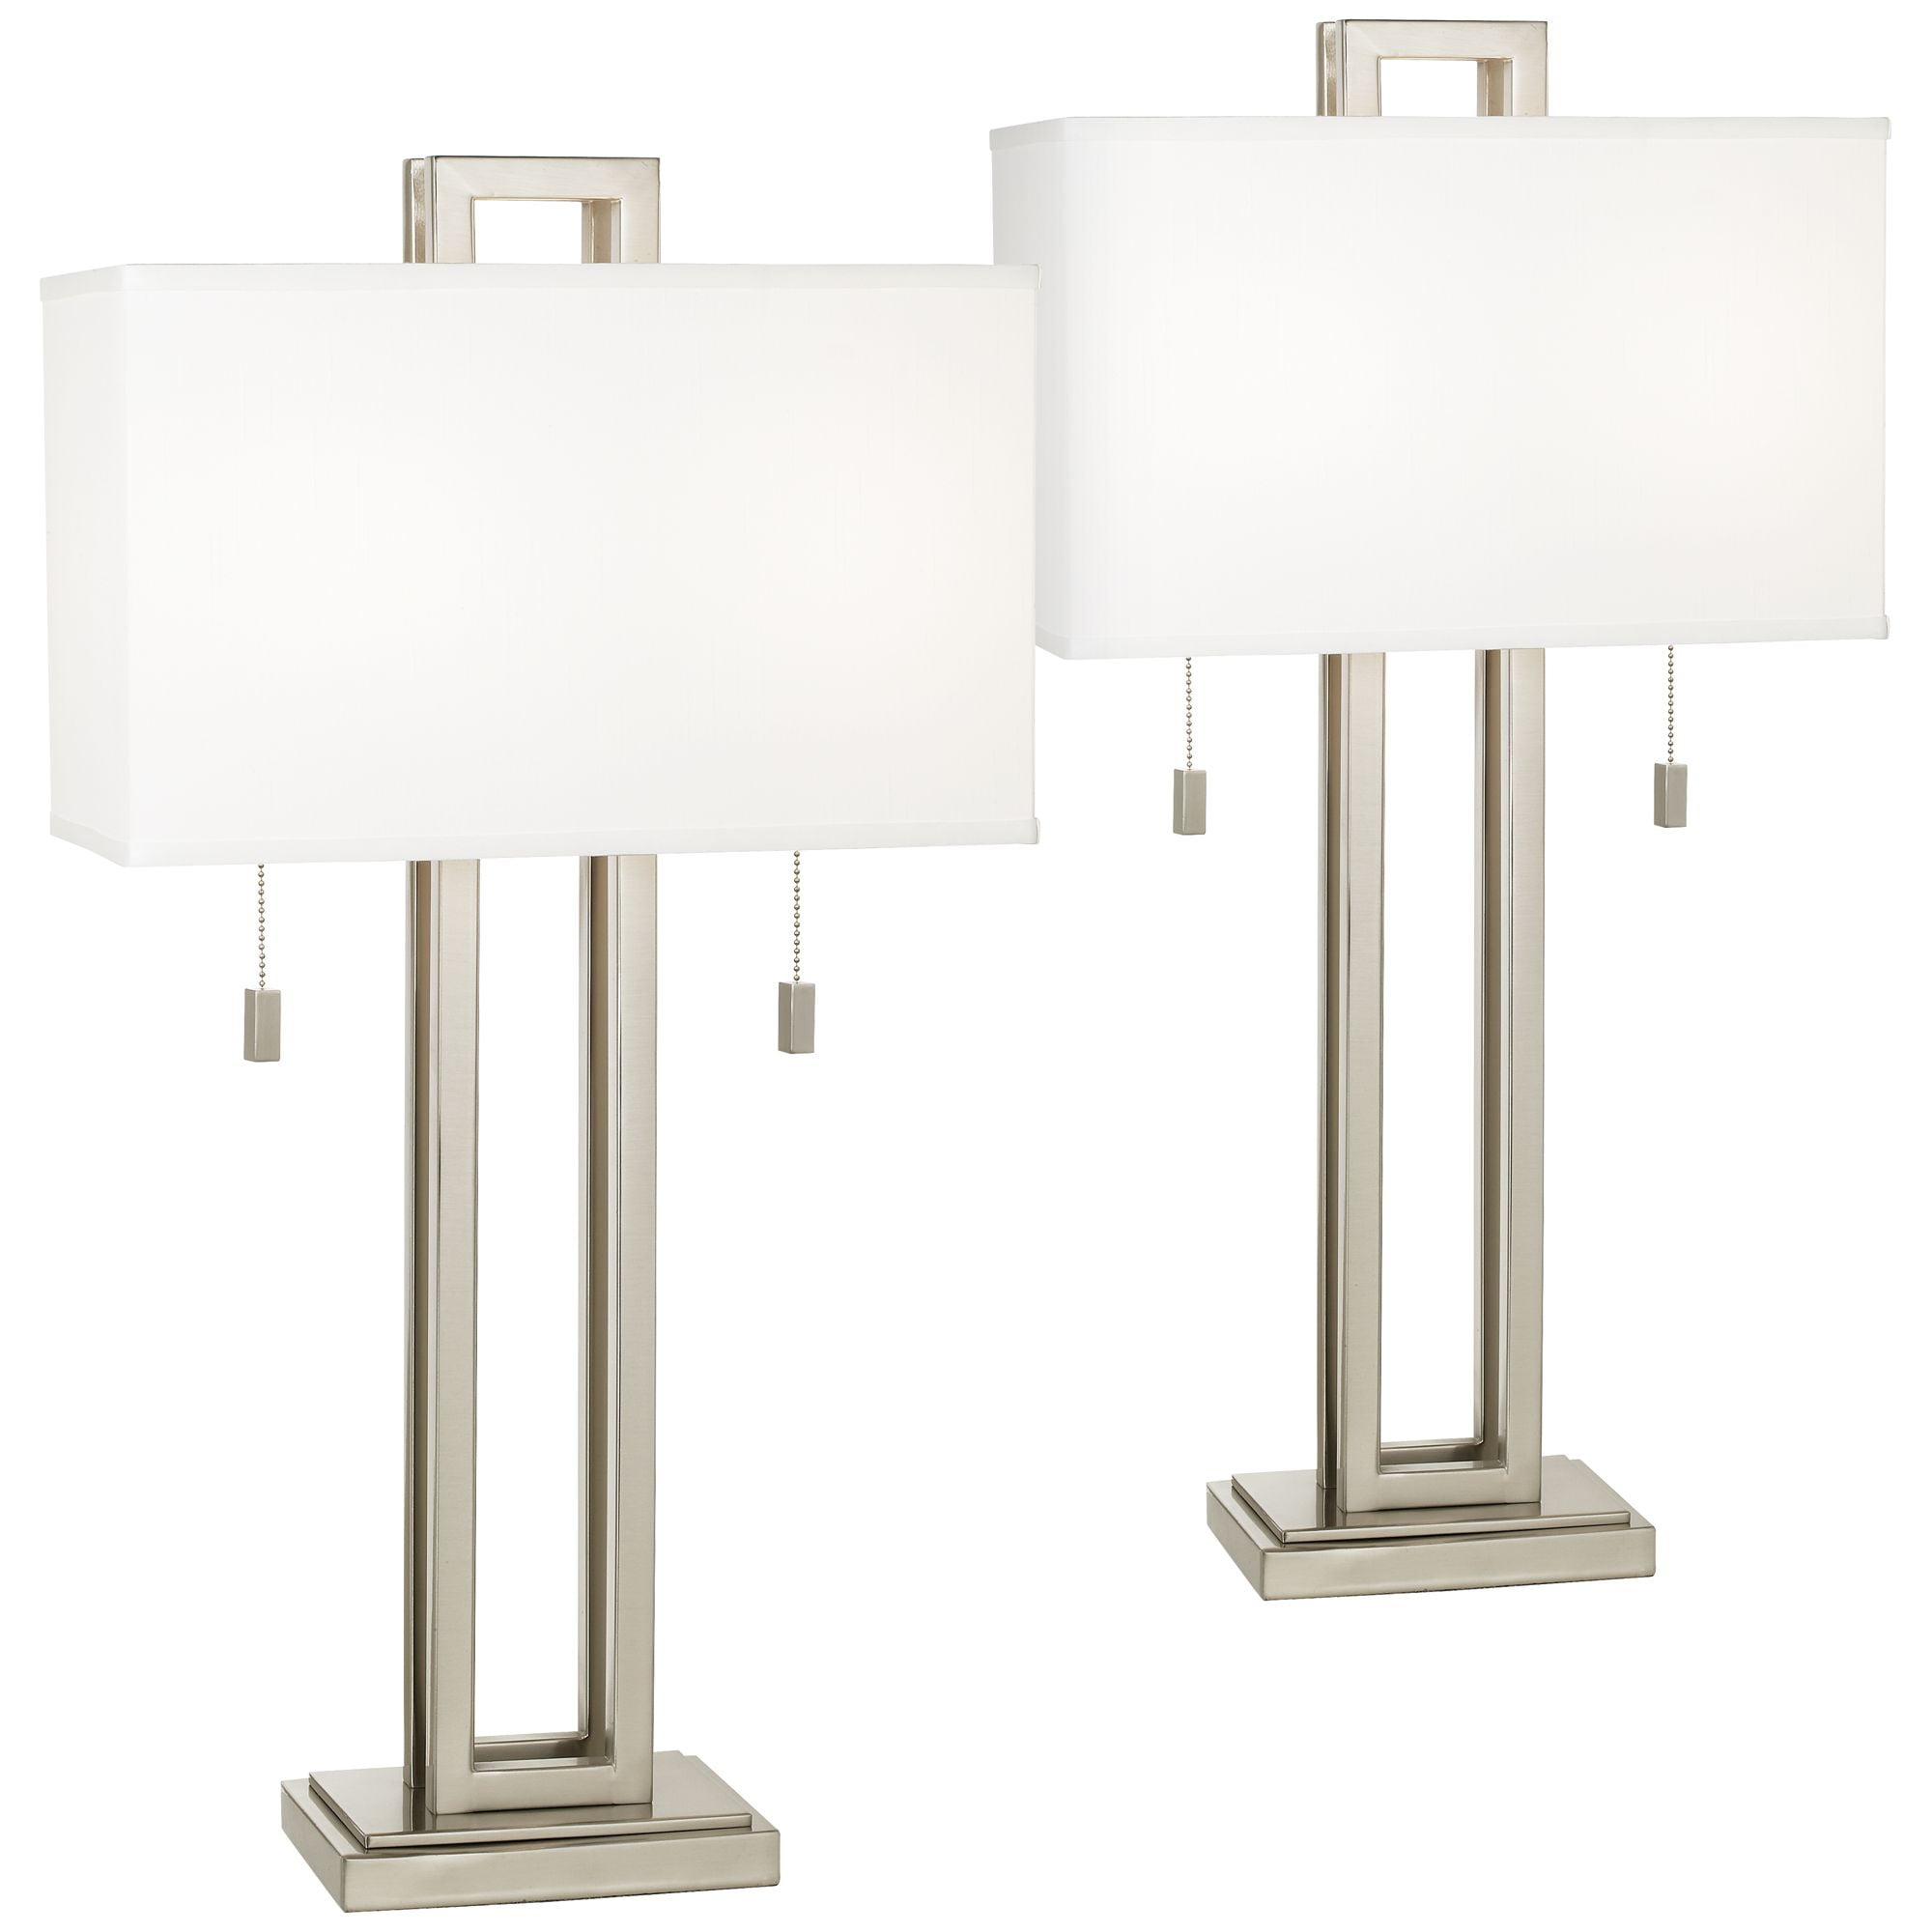 Possini Euro Design Modern Table Lamps, Brushed Nickel Table Lamps Set Of 2